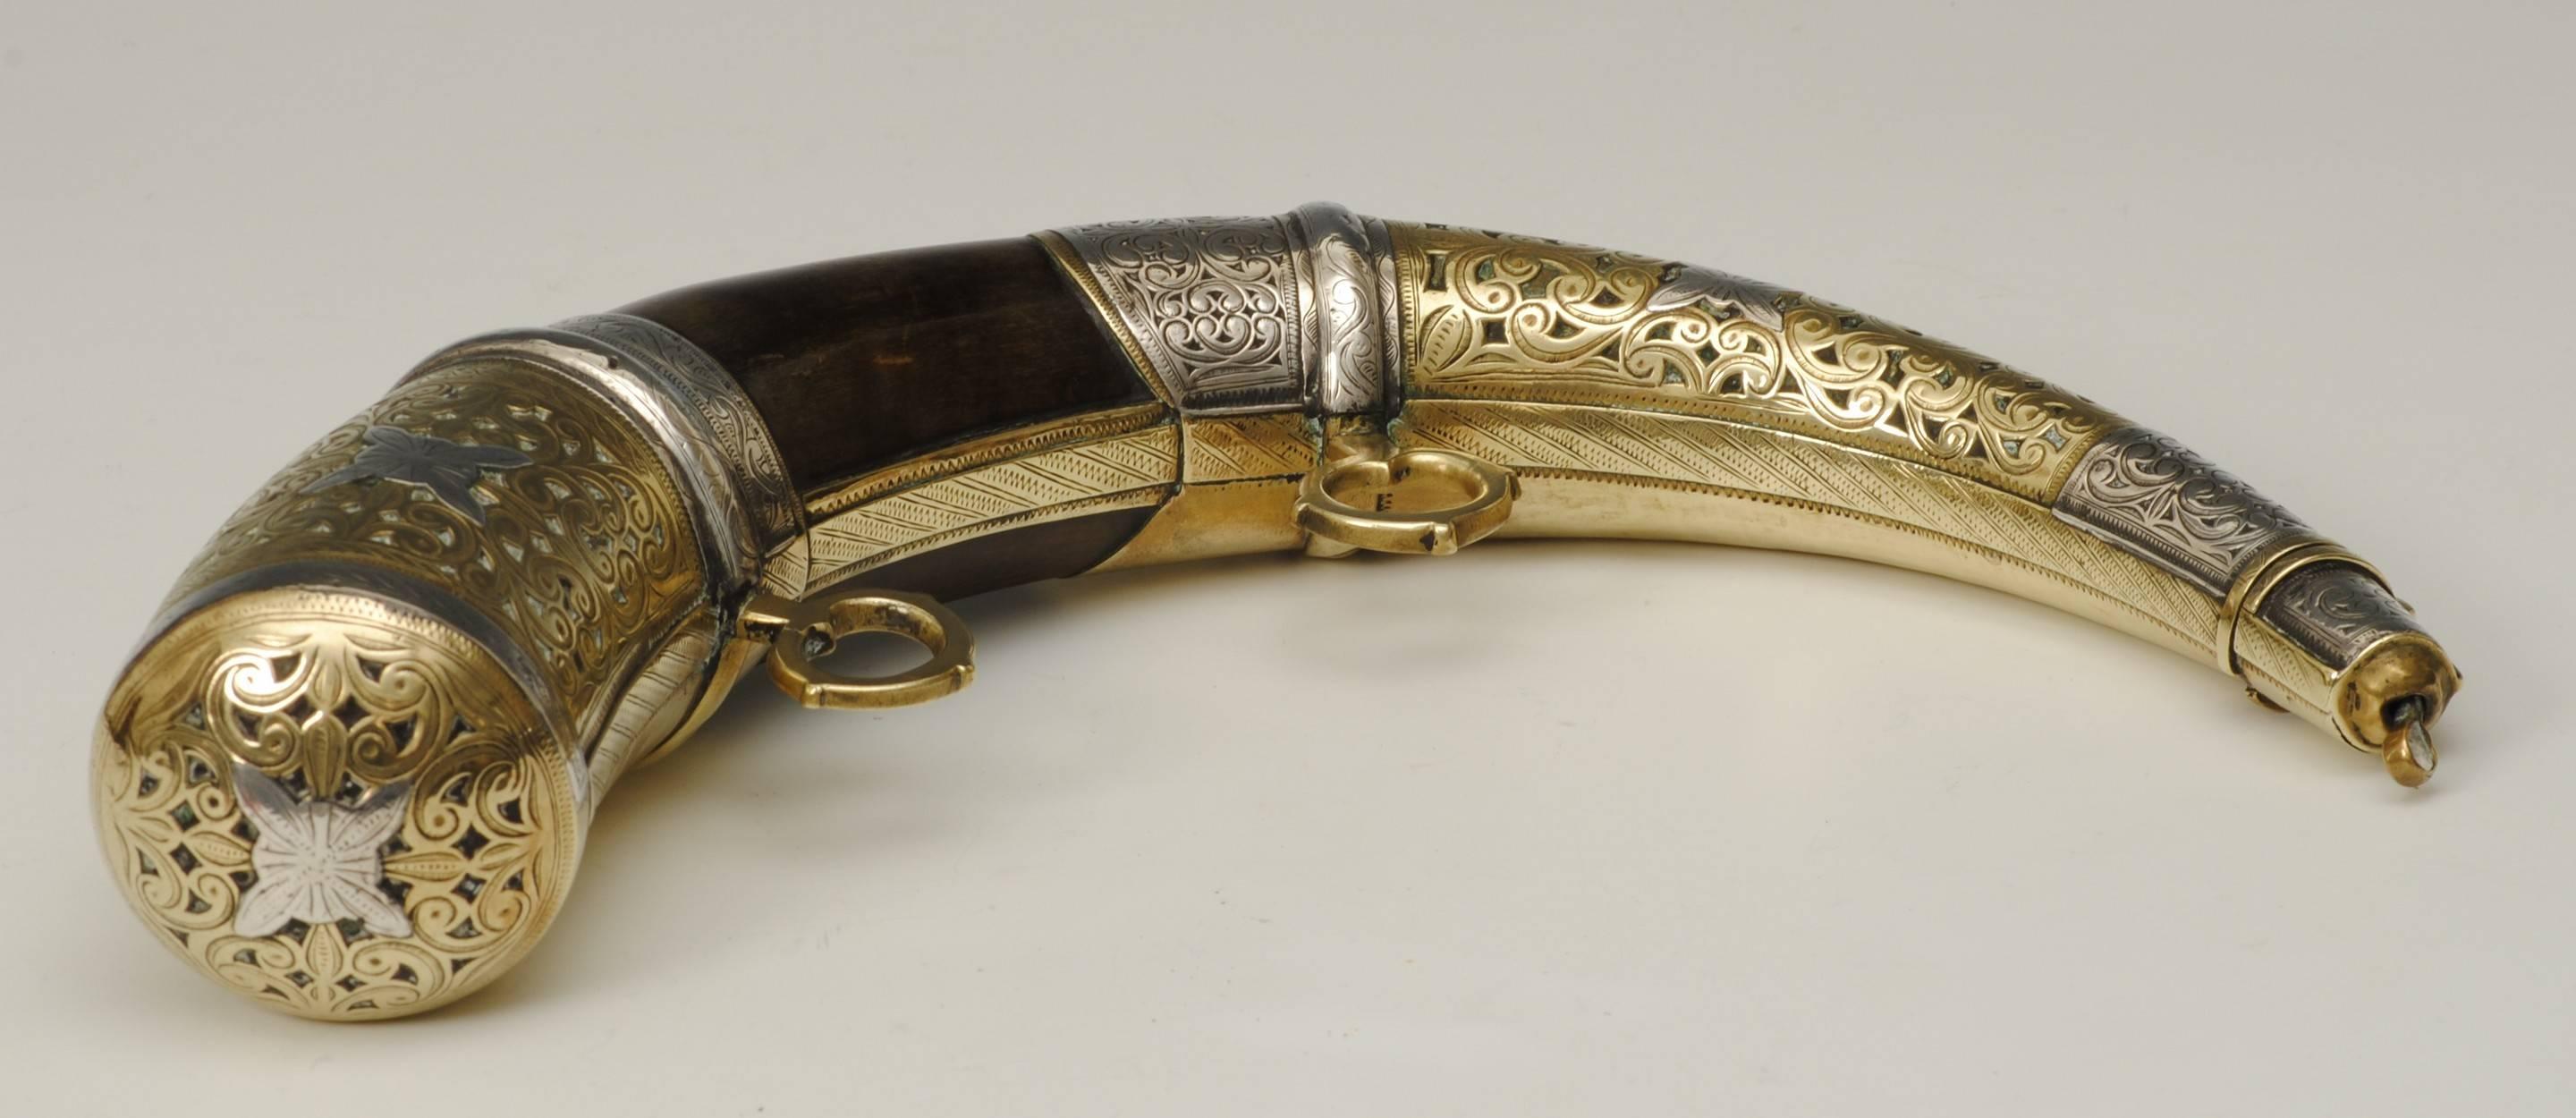 19th Century Islamic Brass and Silver Powder Horn